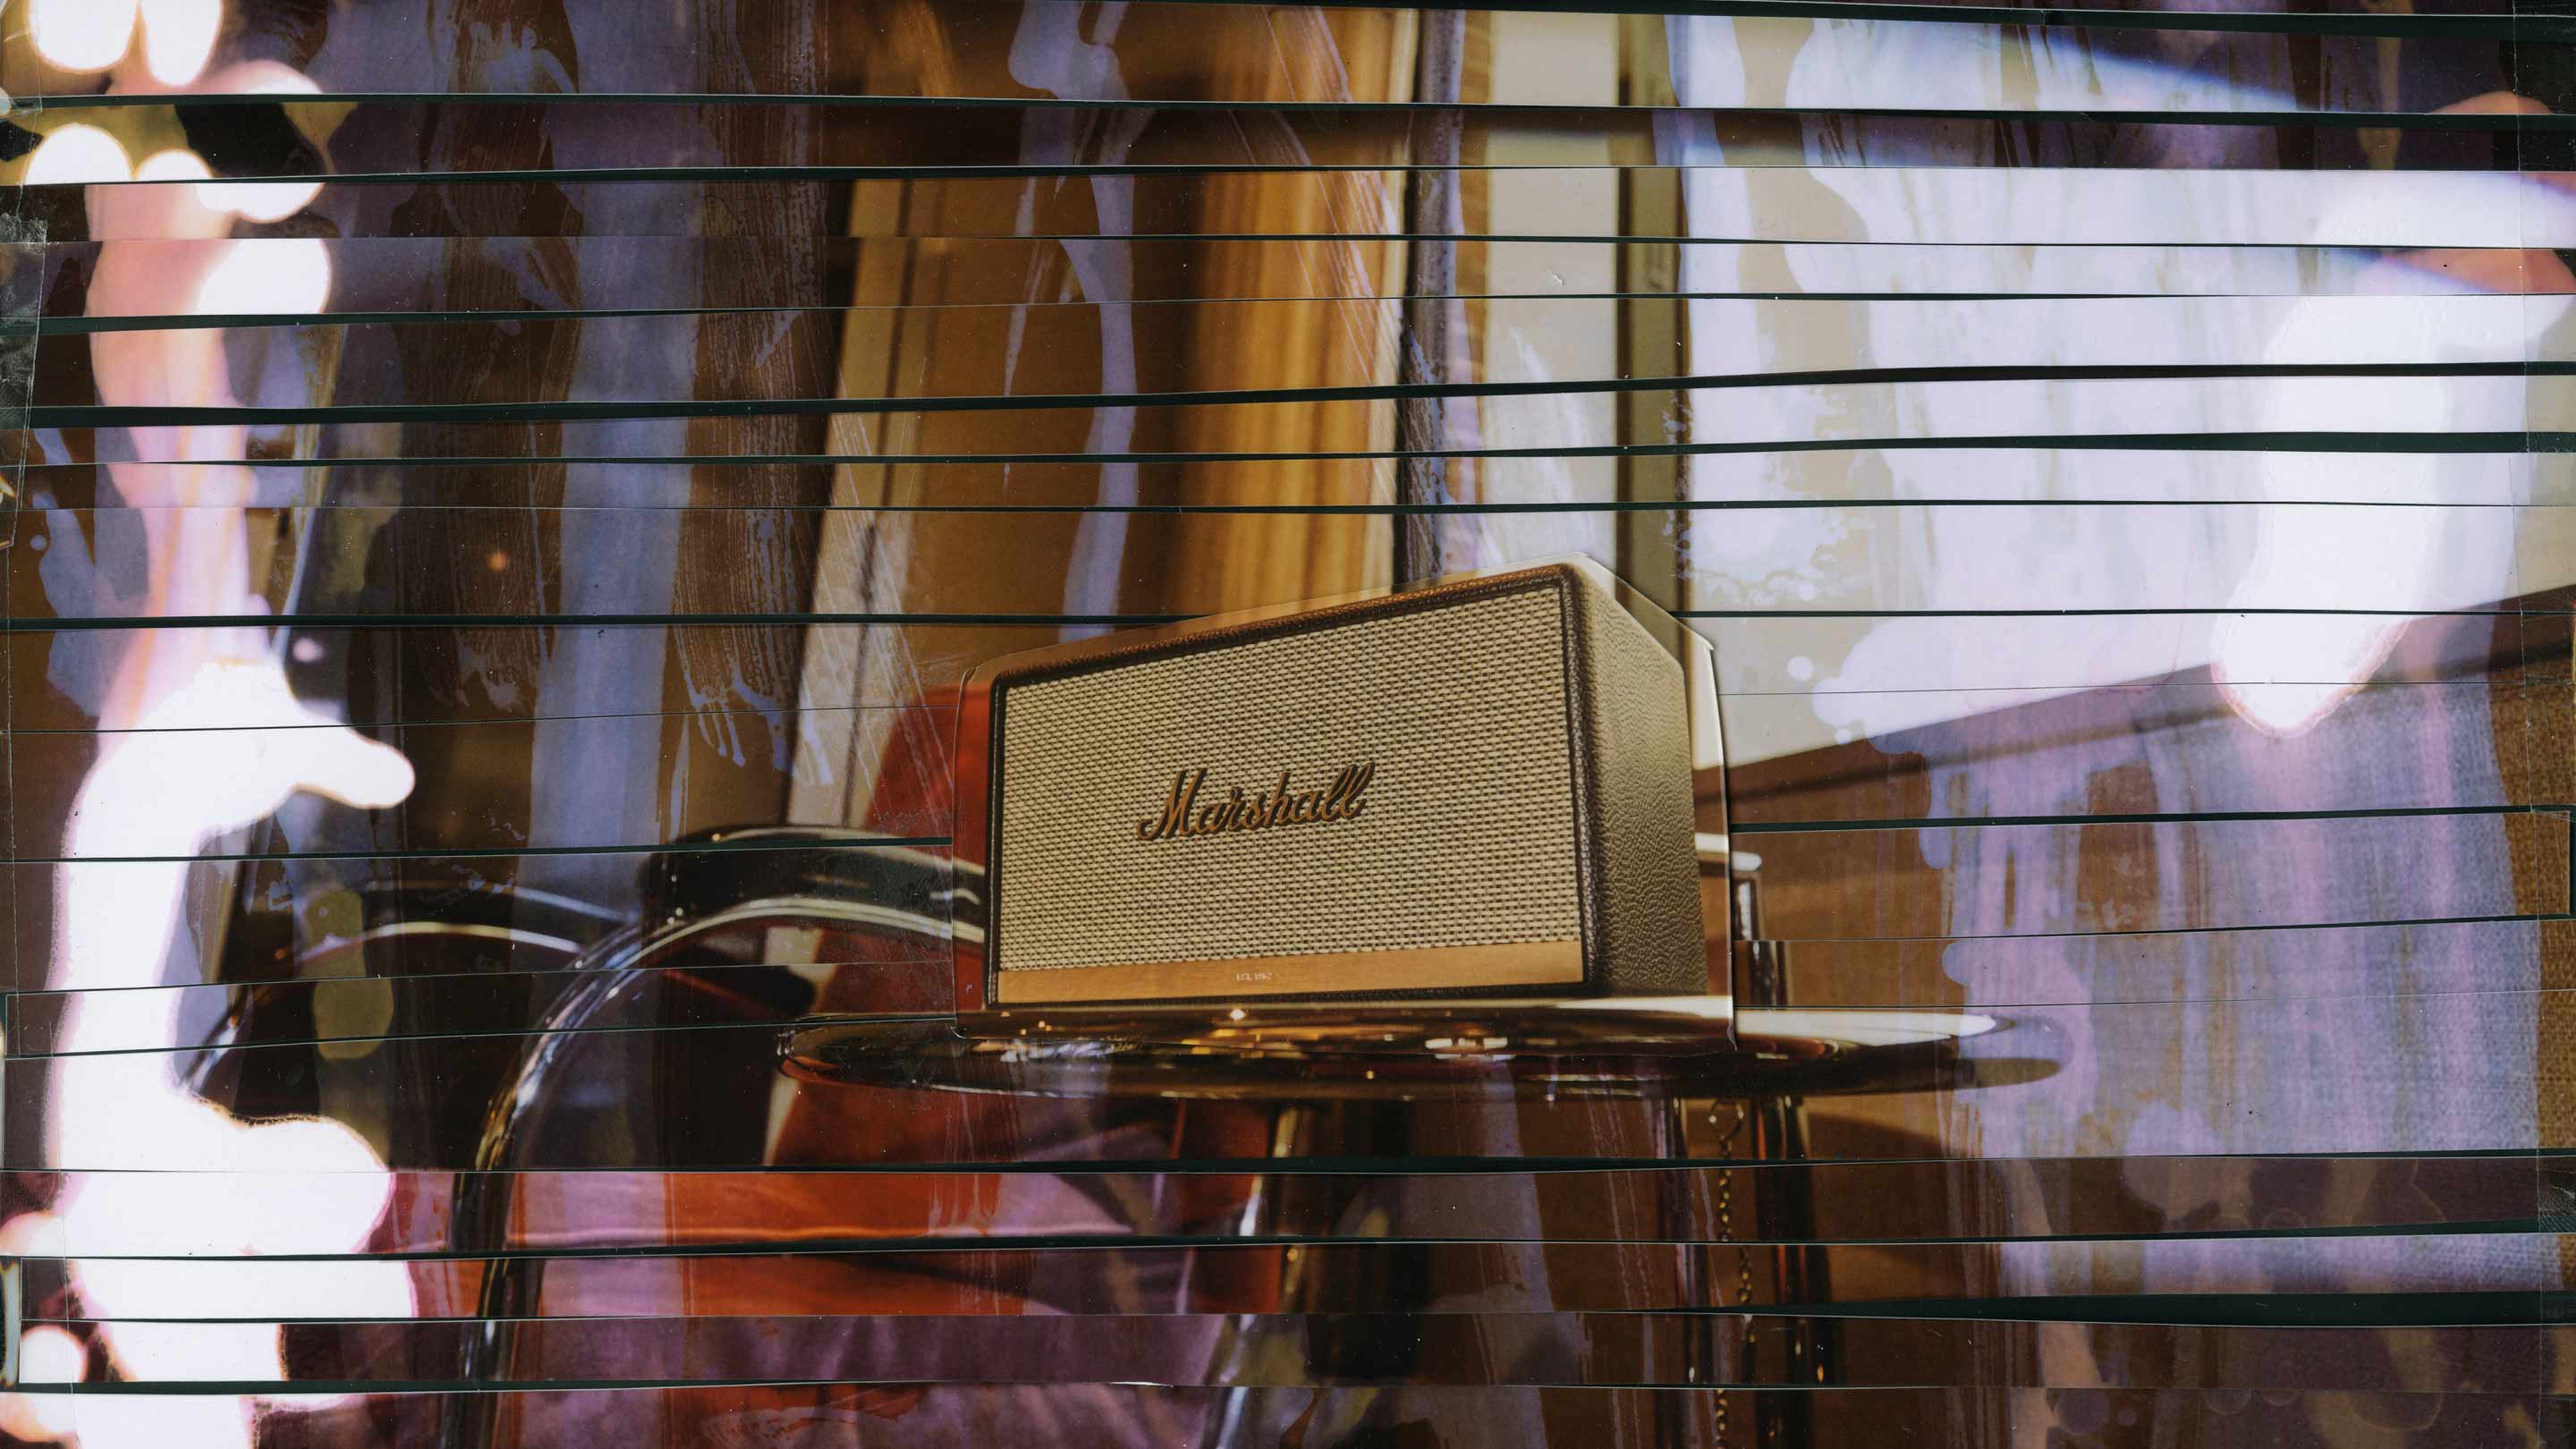 A marshall amplifier sits on a glass table with a drum set in the background, showcasing its knobs and speaker grille.